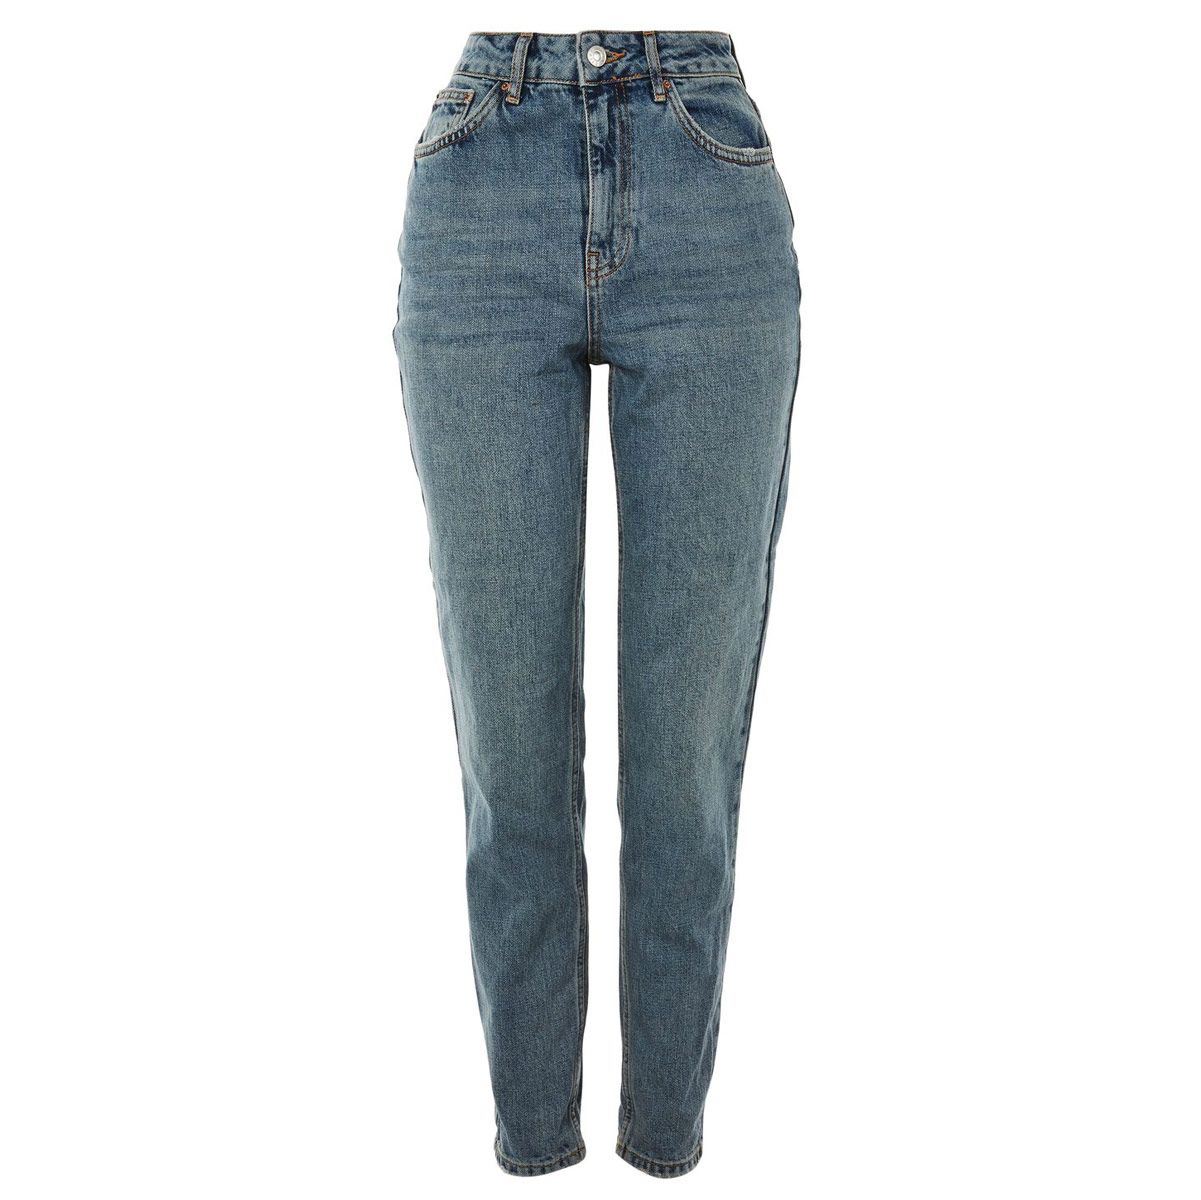 Stephanie Mark Used Topshop Personal Shopping Service for New Denim ...